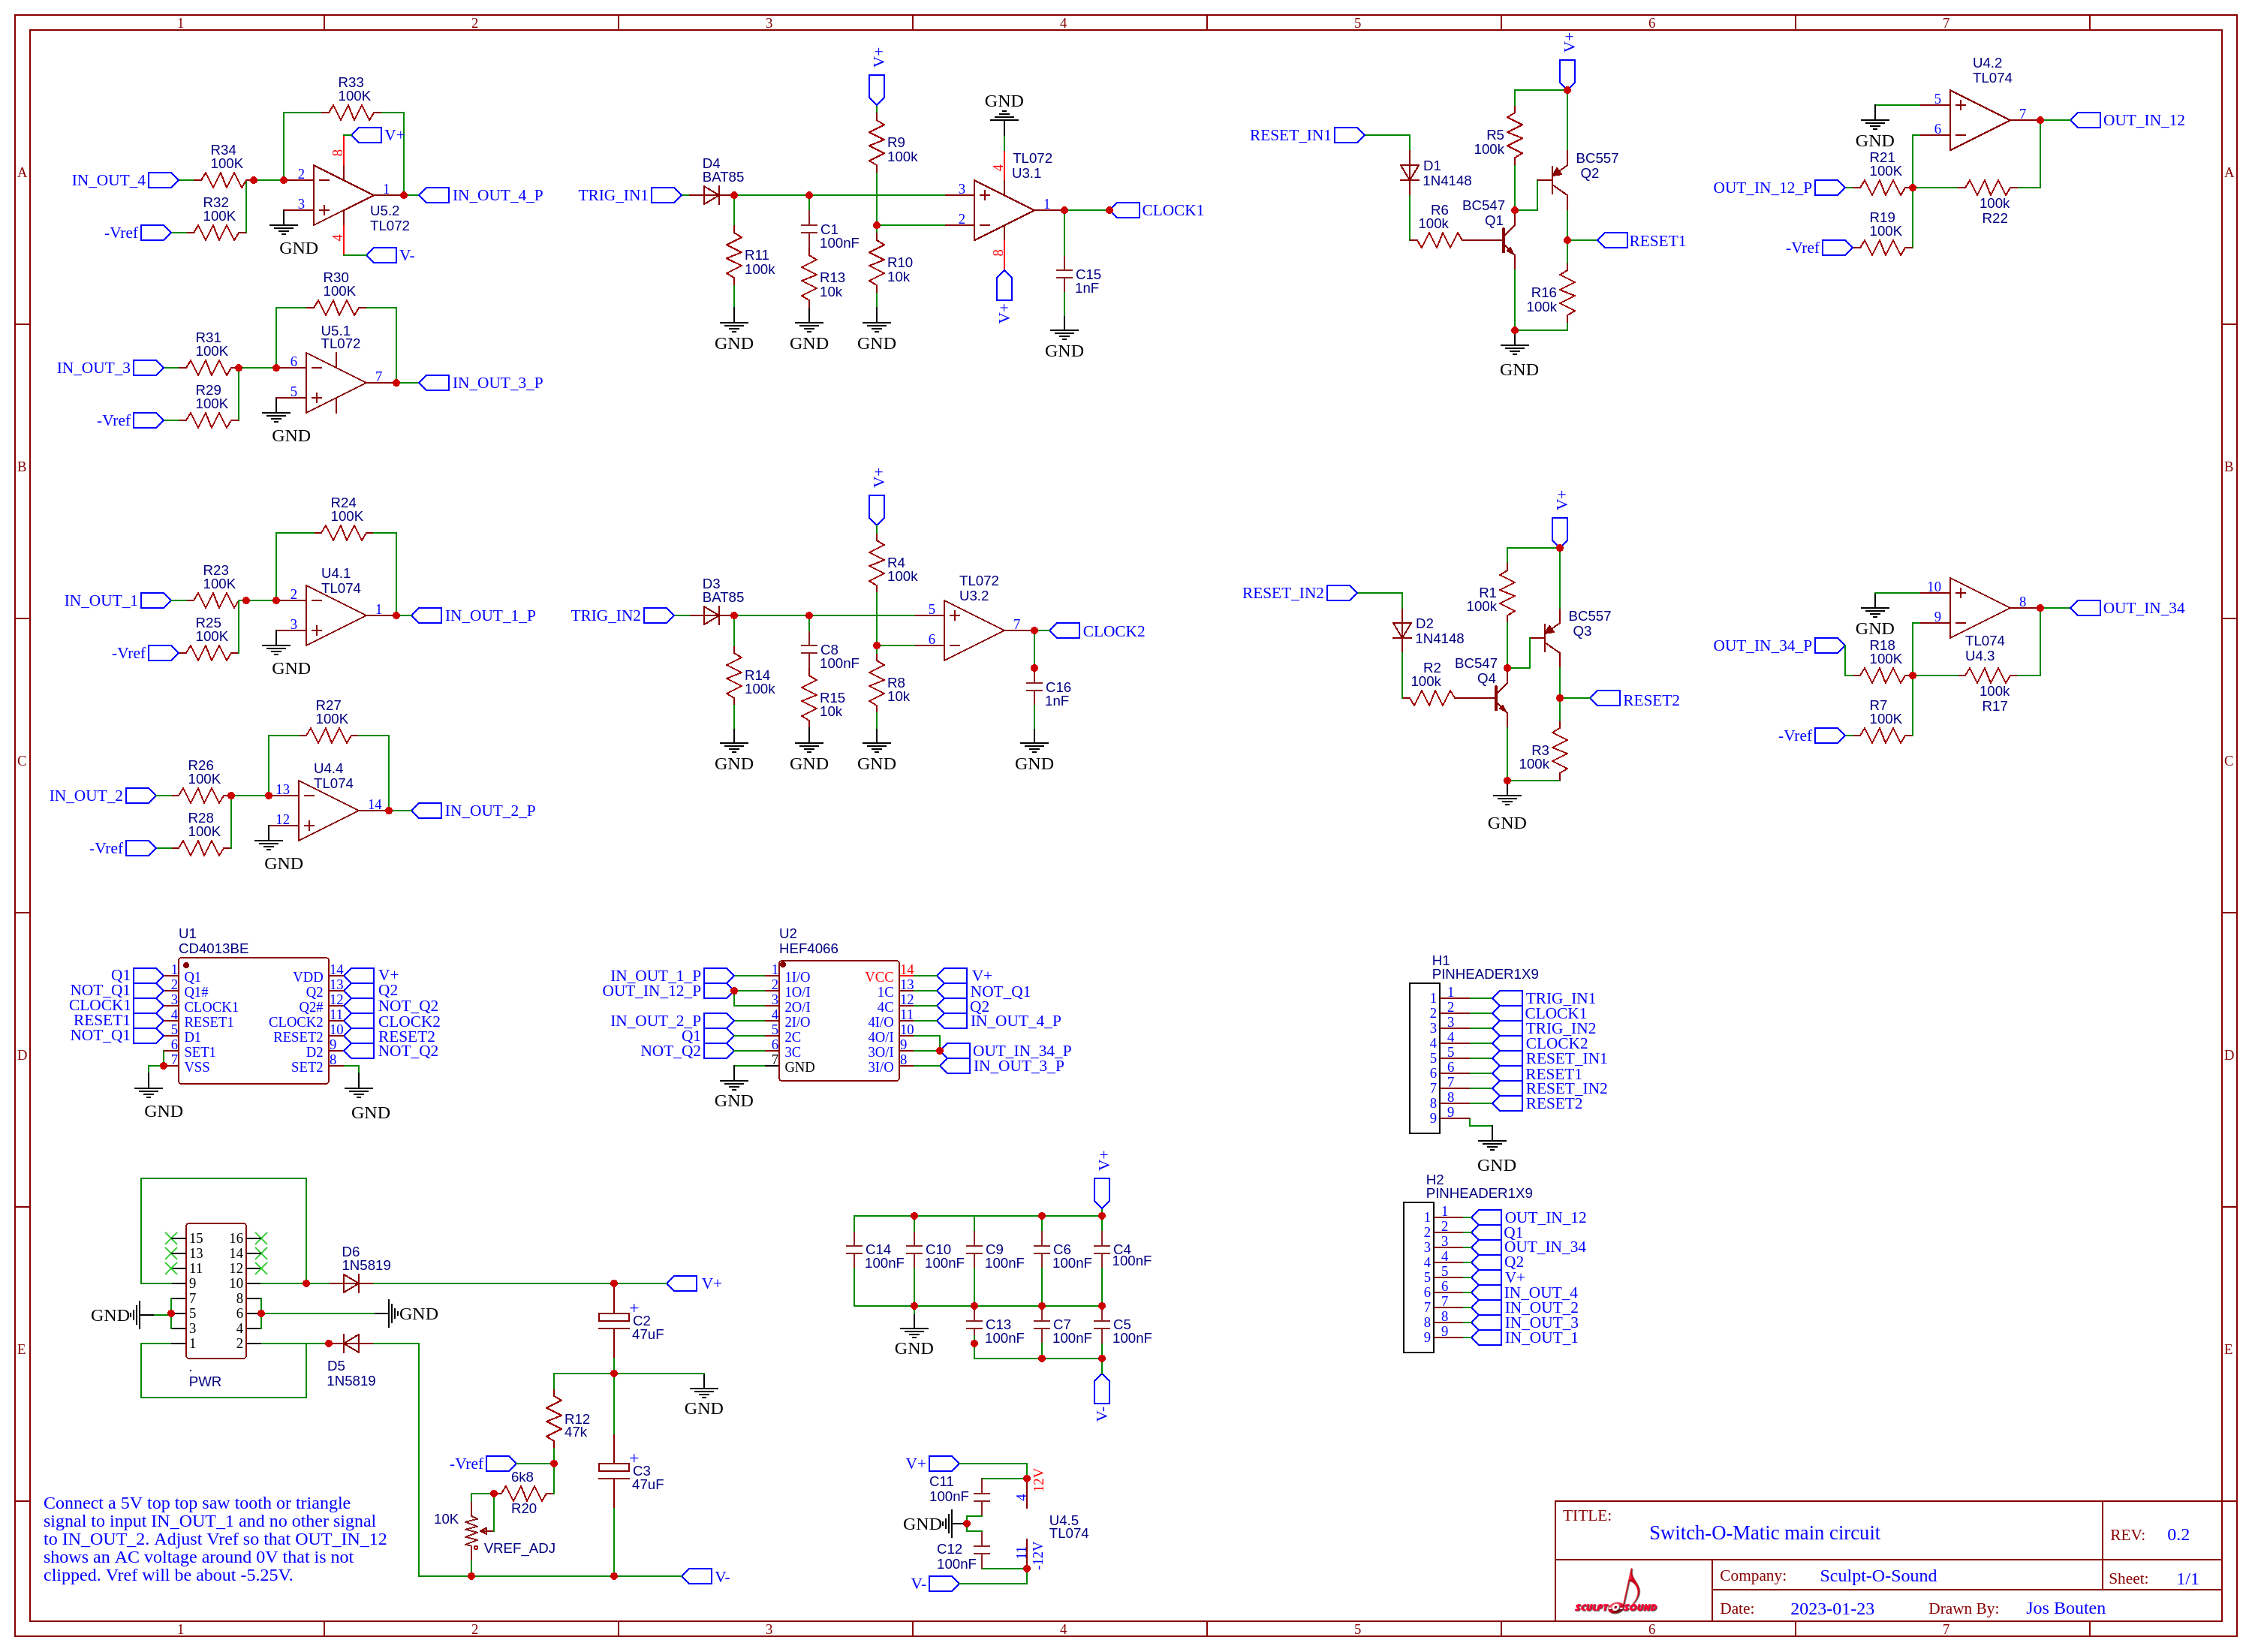 Schematic_Dual-Switch-O-Matic_main_circuit_v0.2.png